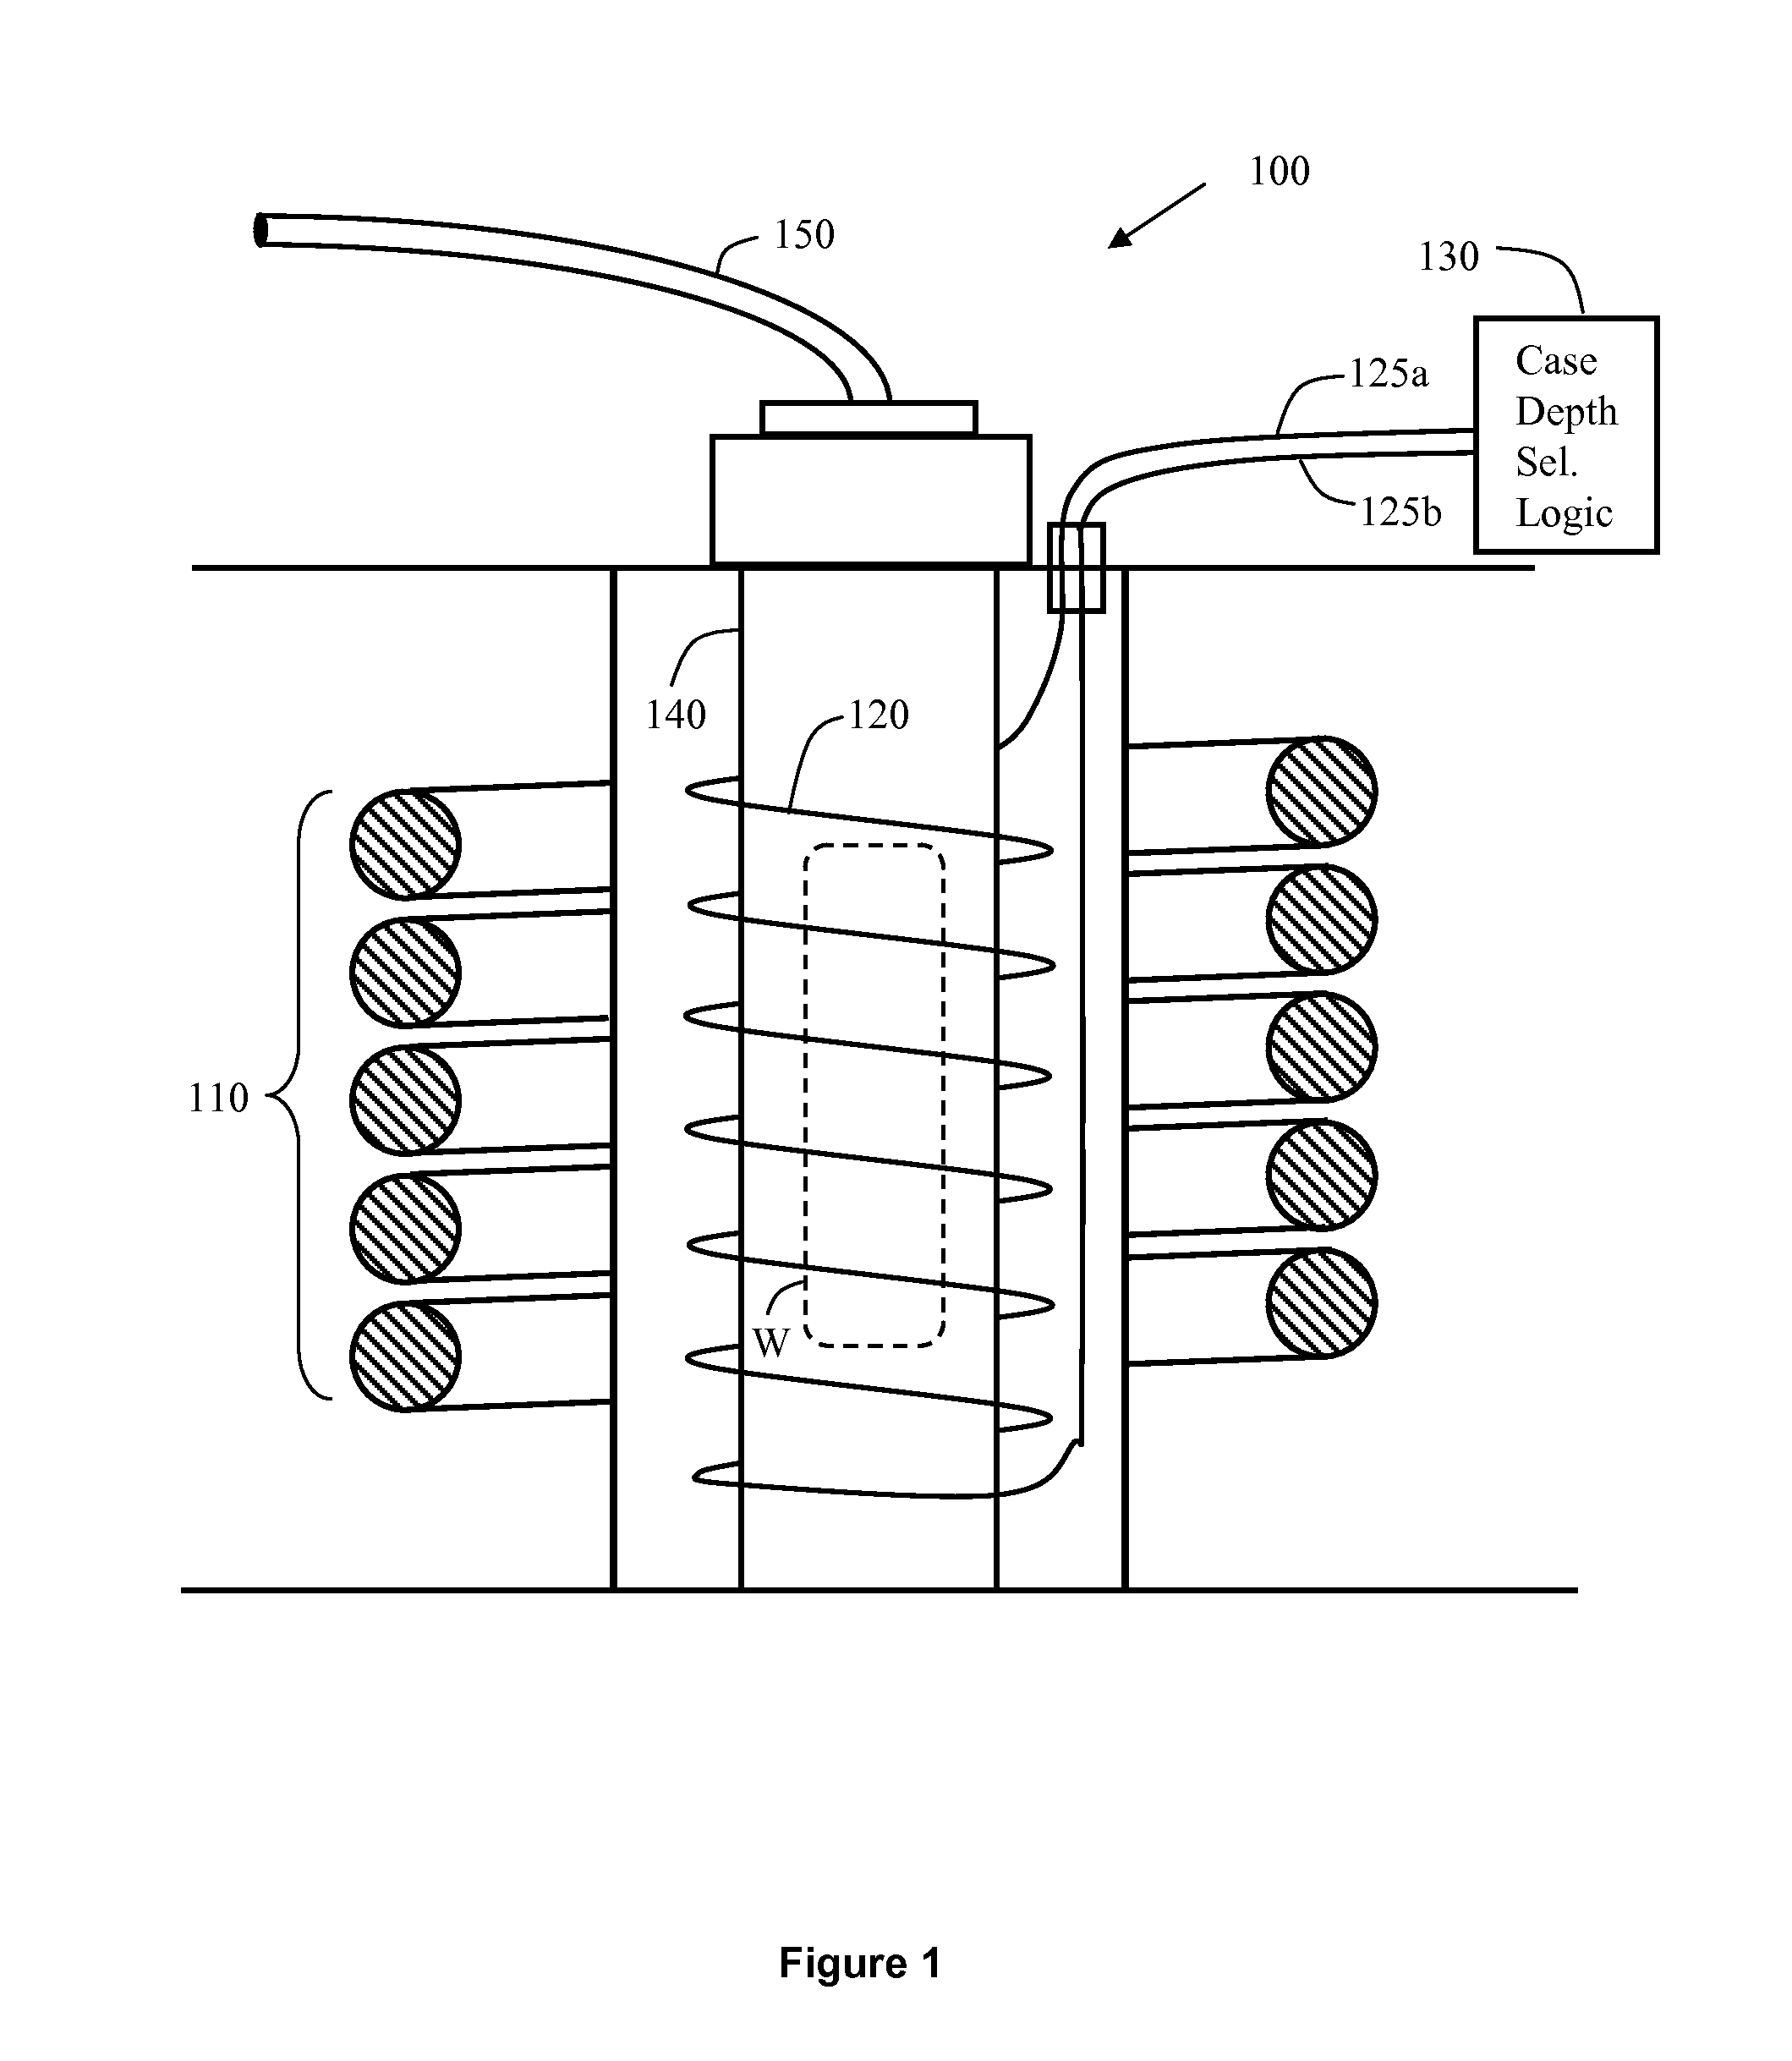 Selective case depth thermo-magnetic processing and apparatus